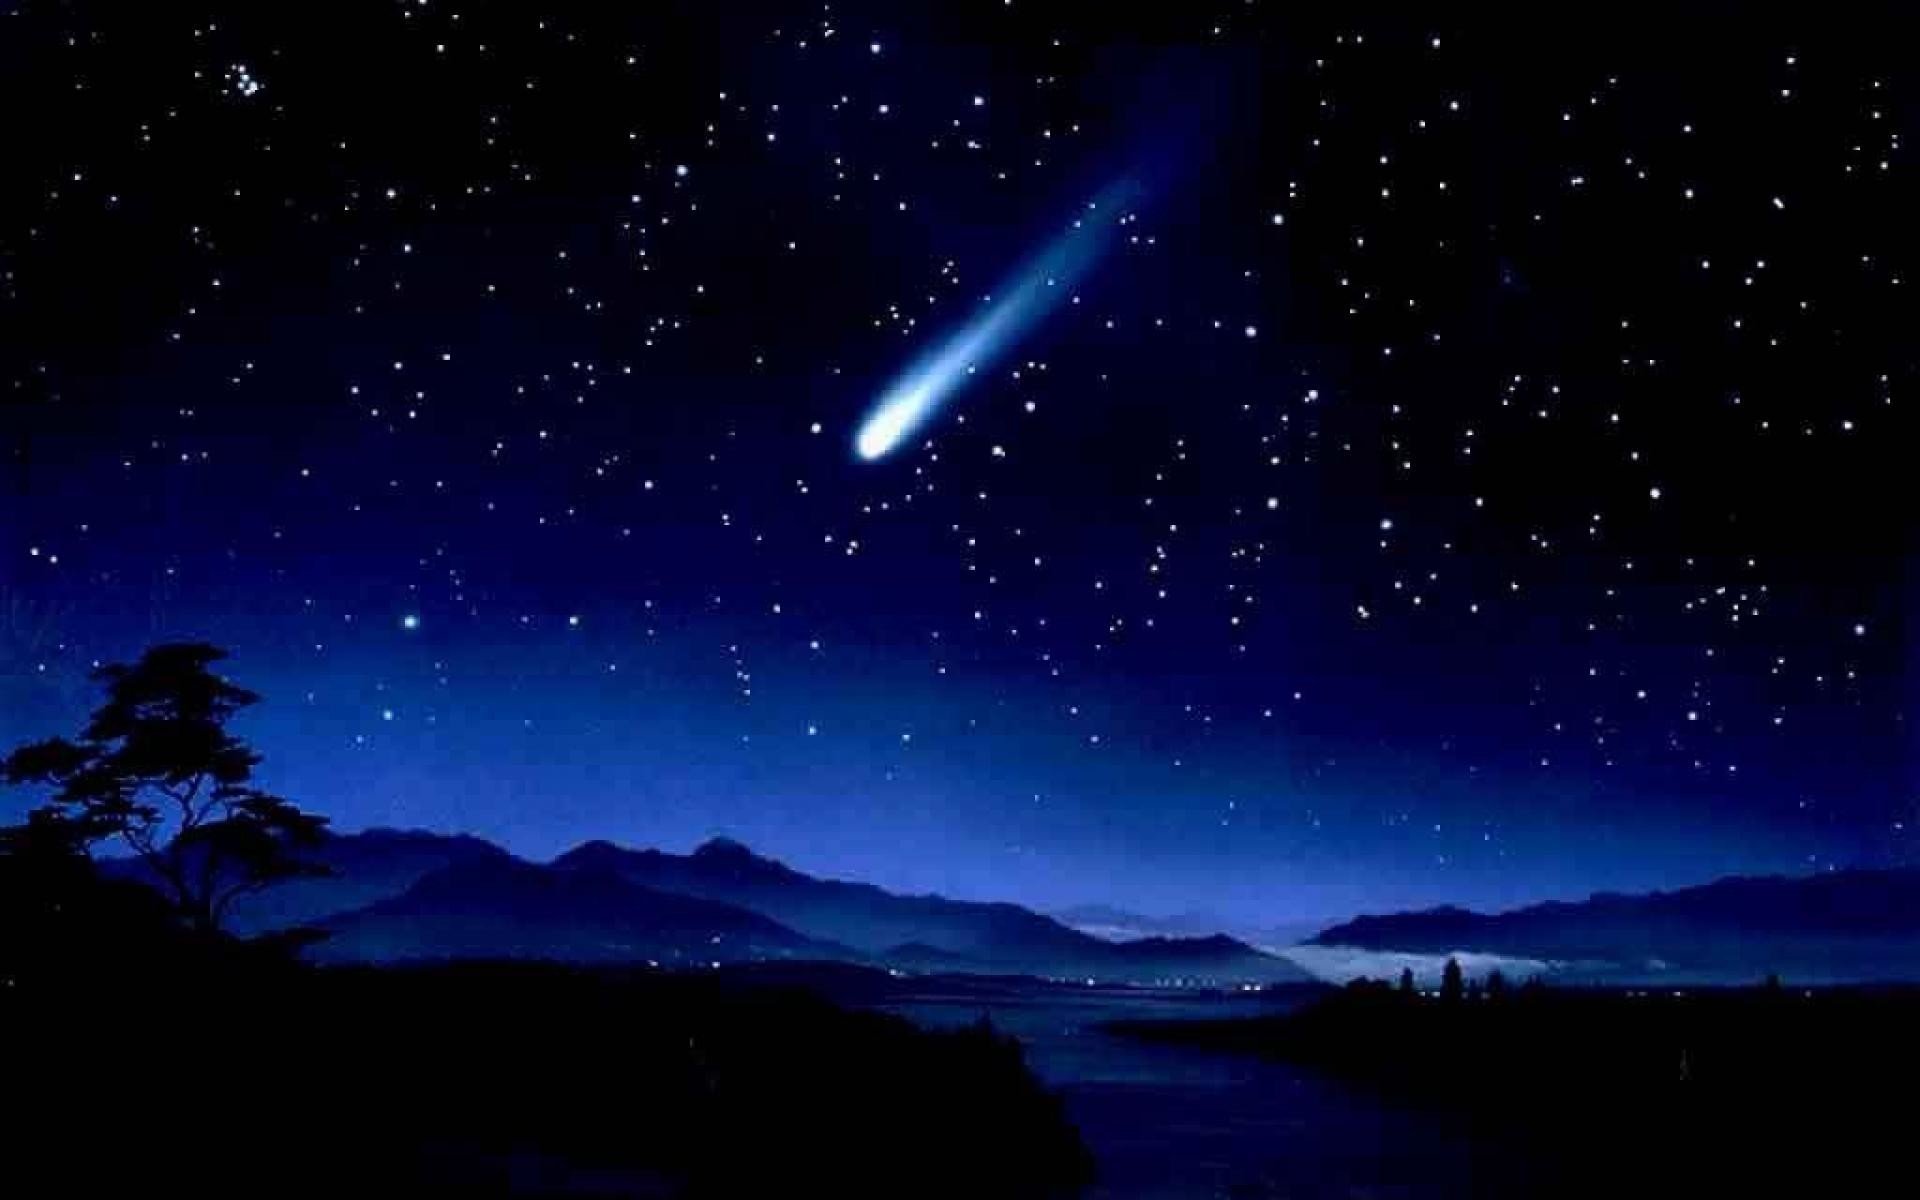 A shooting star in the night sky